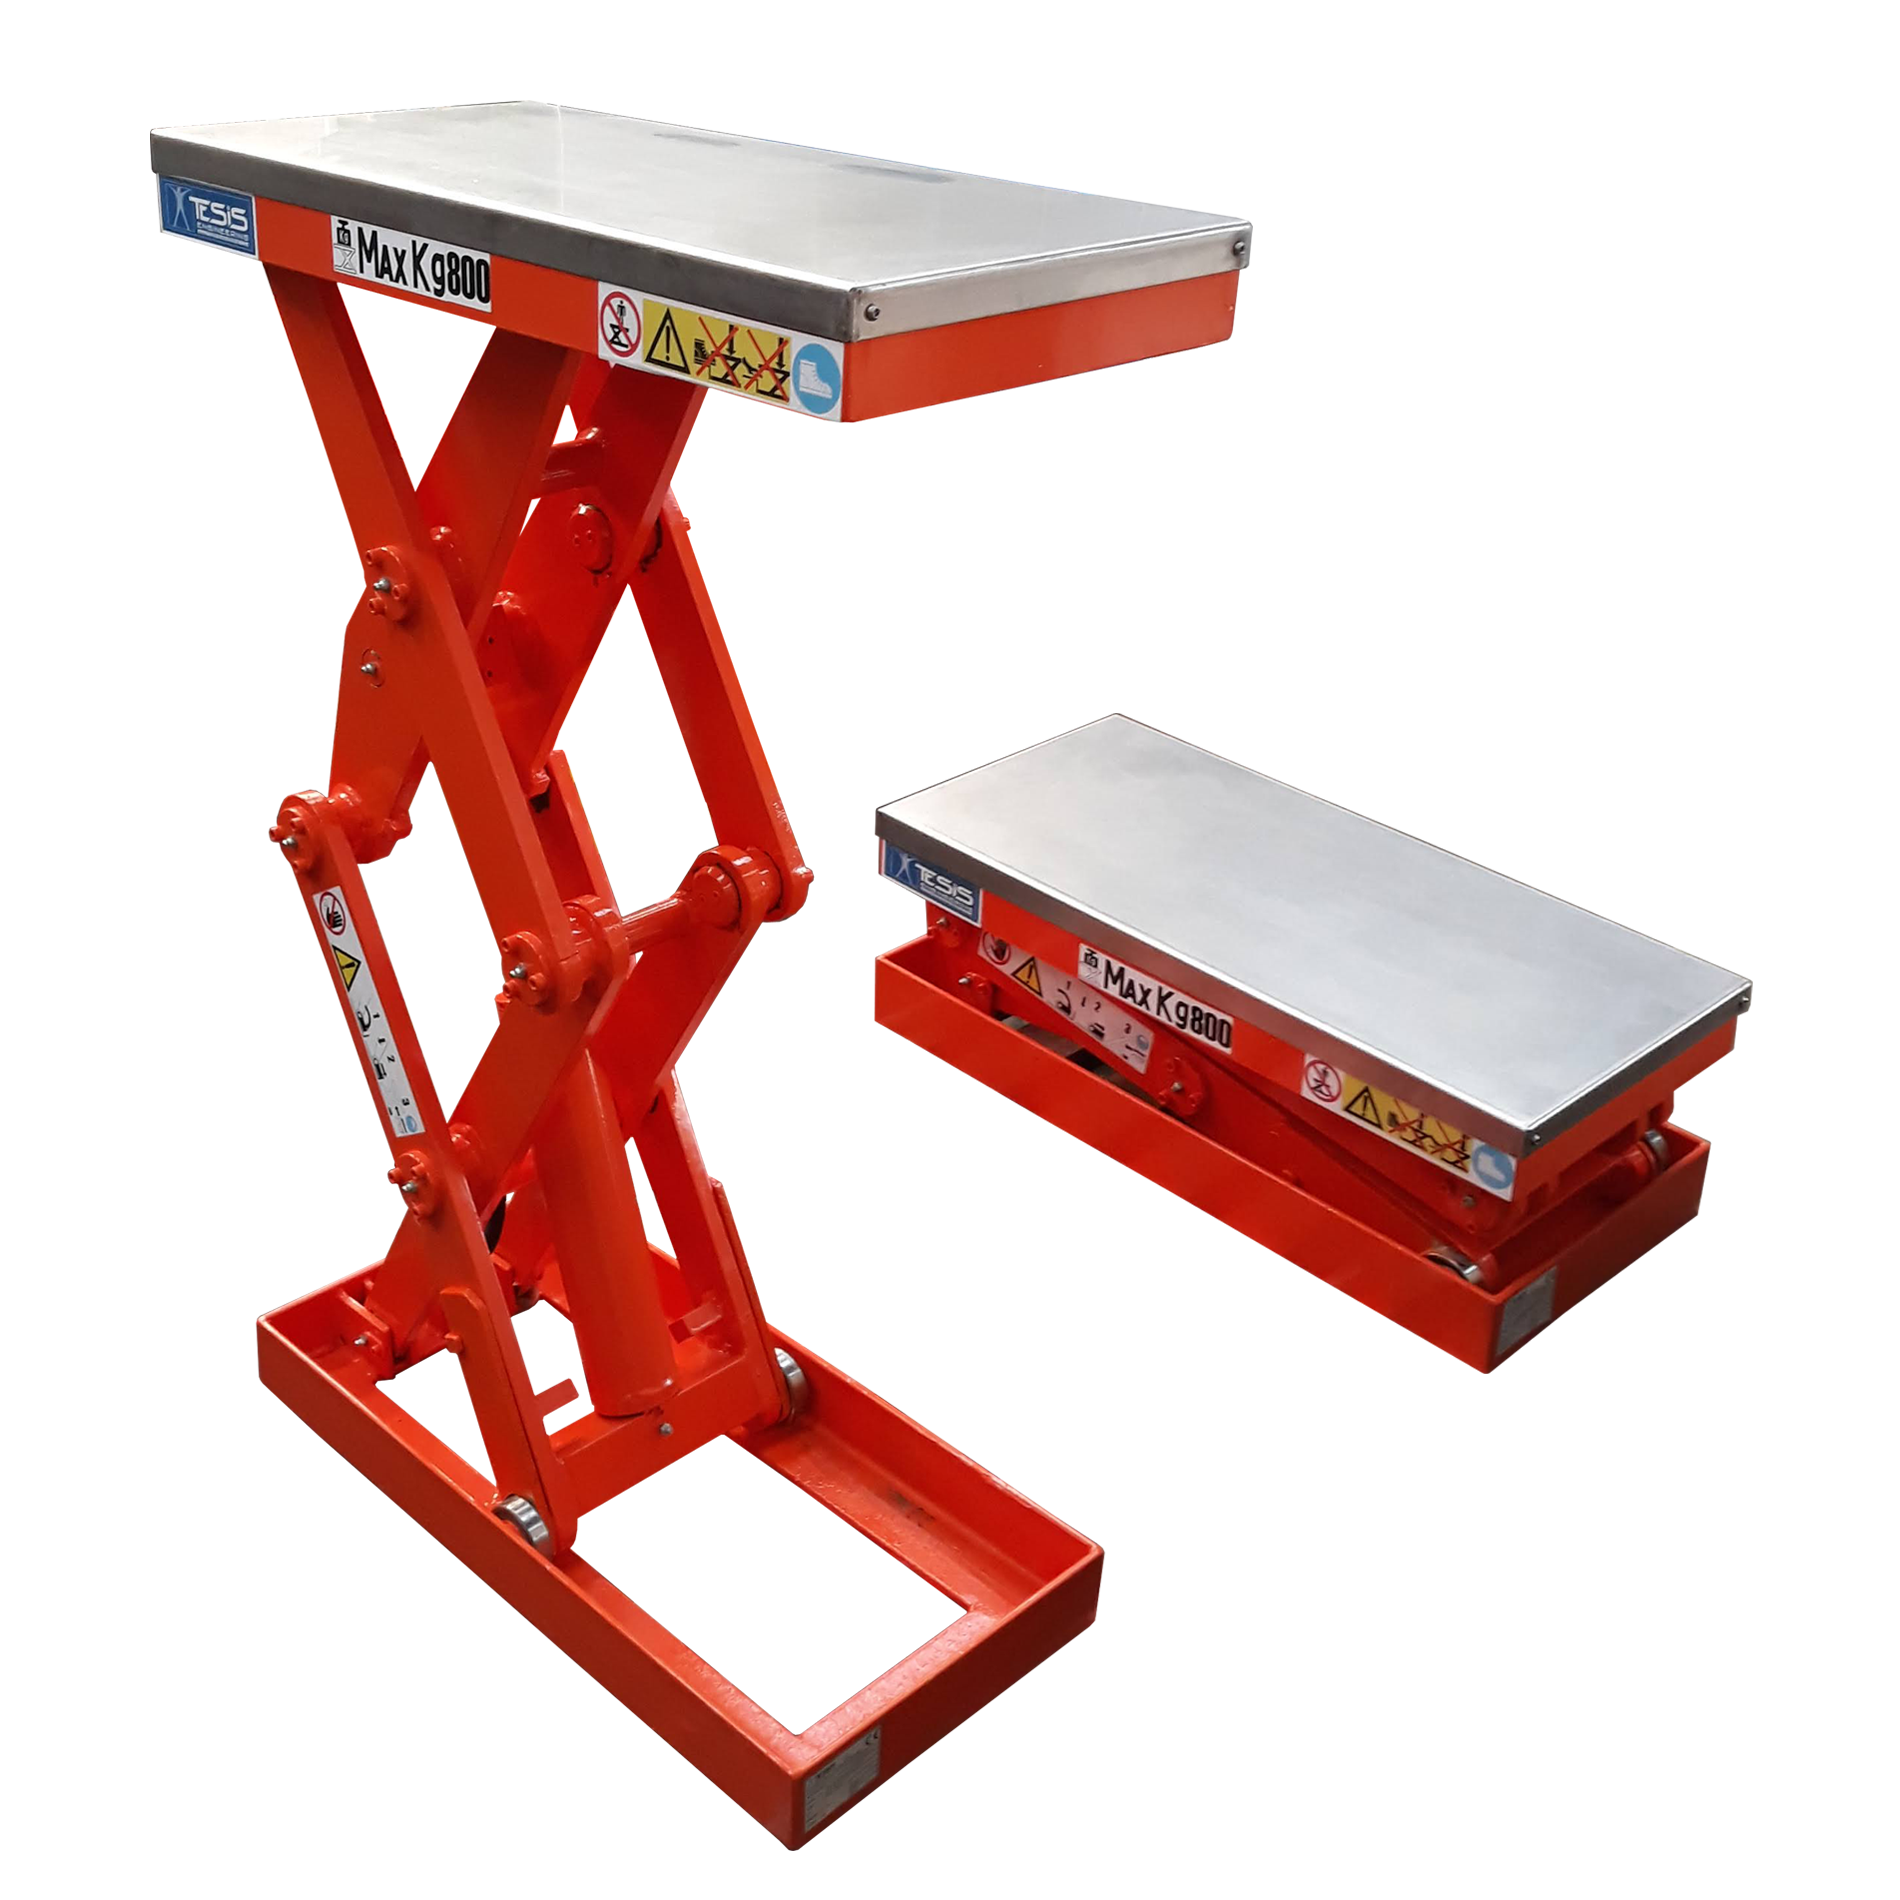 Scissor lift tables with stainless steel top platform, lifting platforms for basket loading and unloading lines, for containers,  baskets loaders unloaders for glass metal and plastic containers, platform lifts for packaging transfer lines 